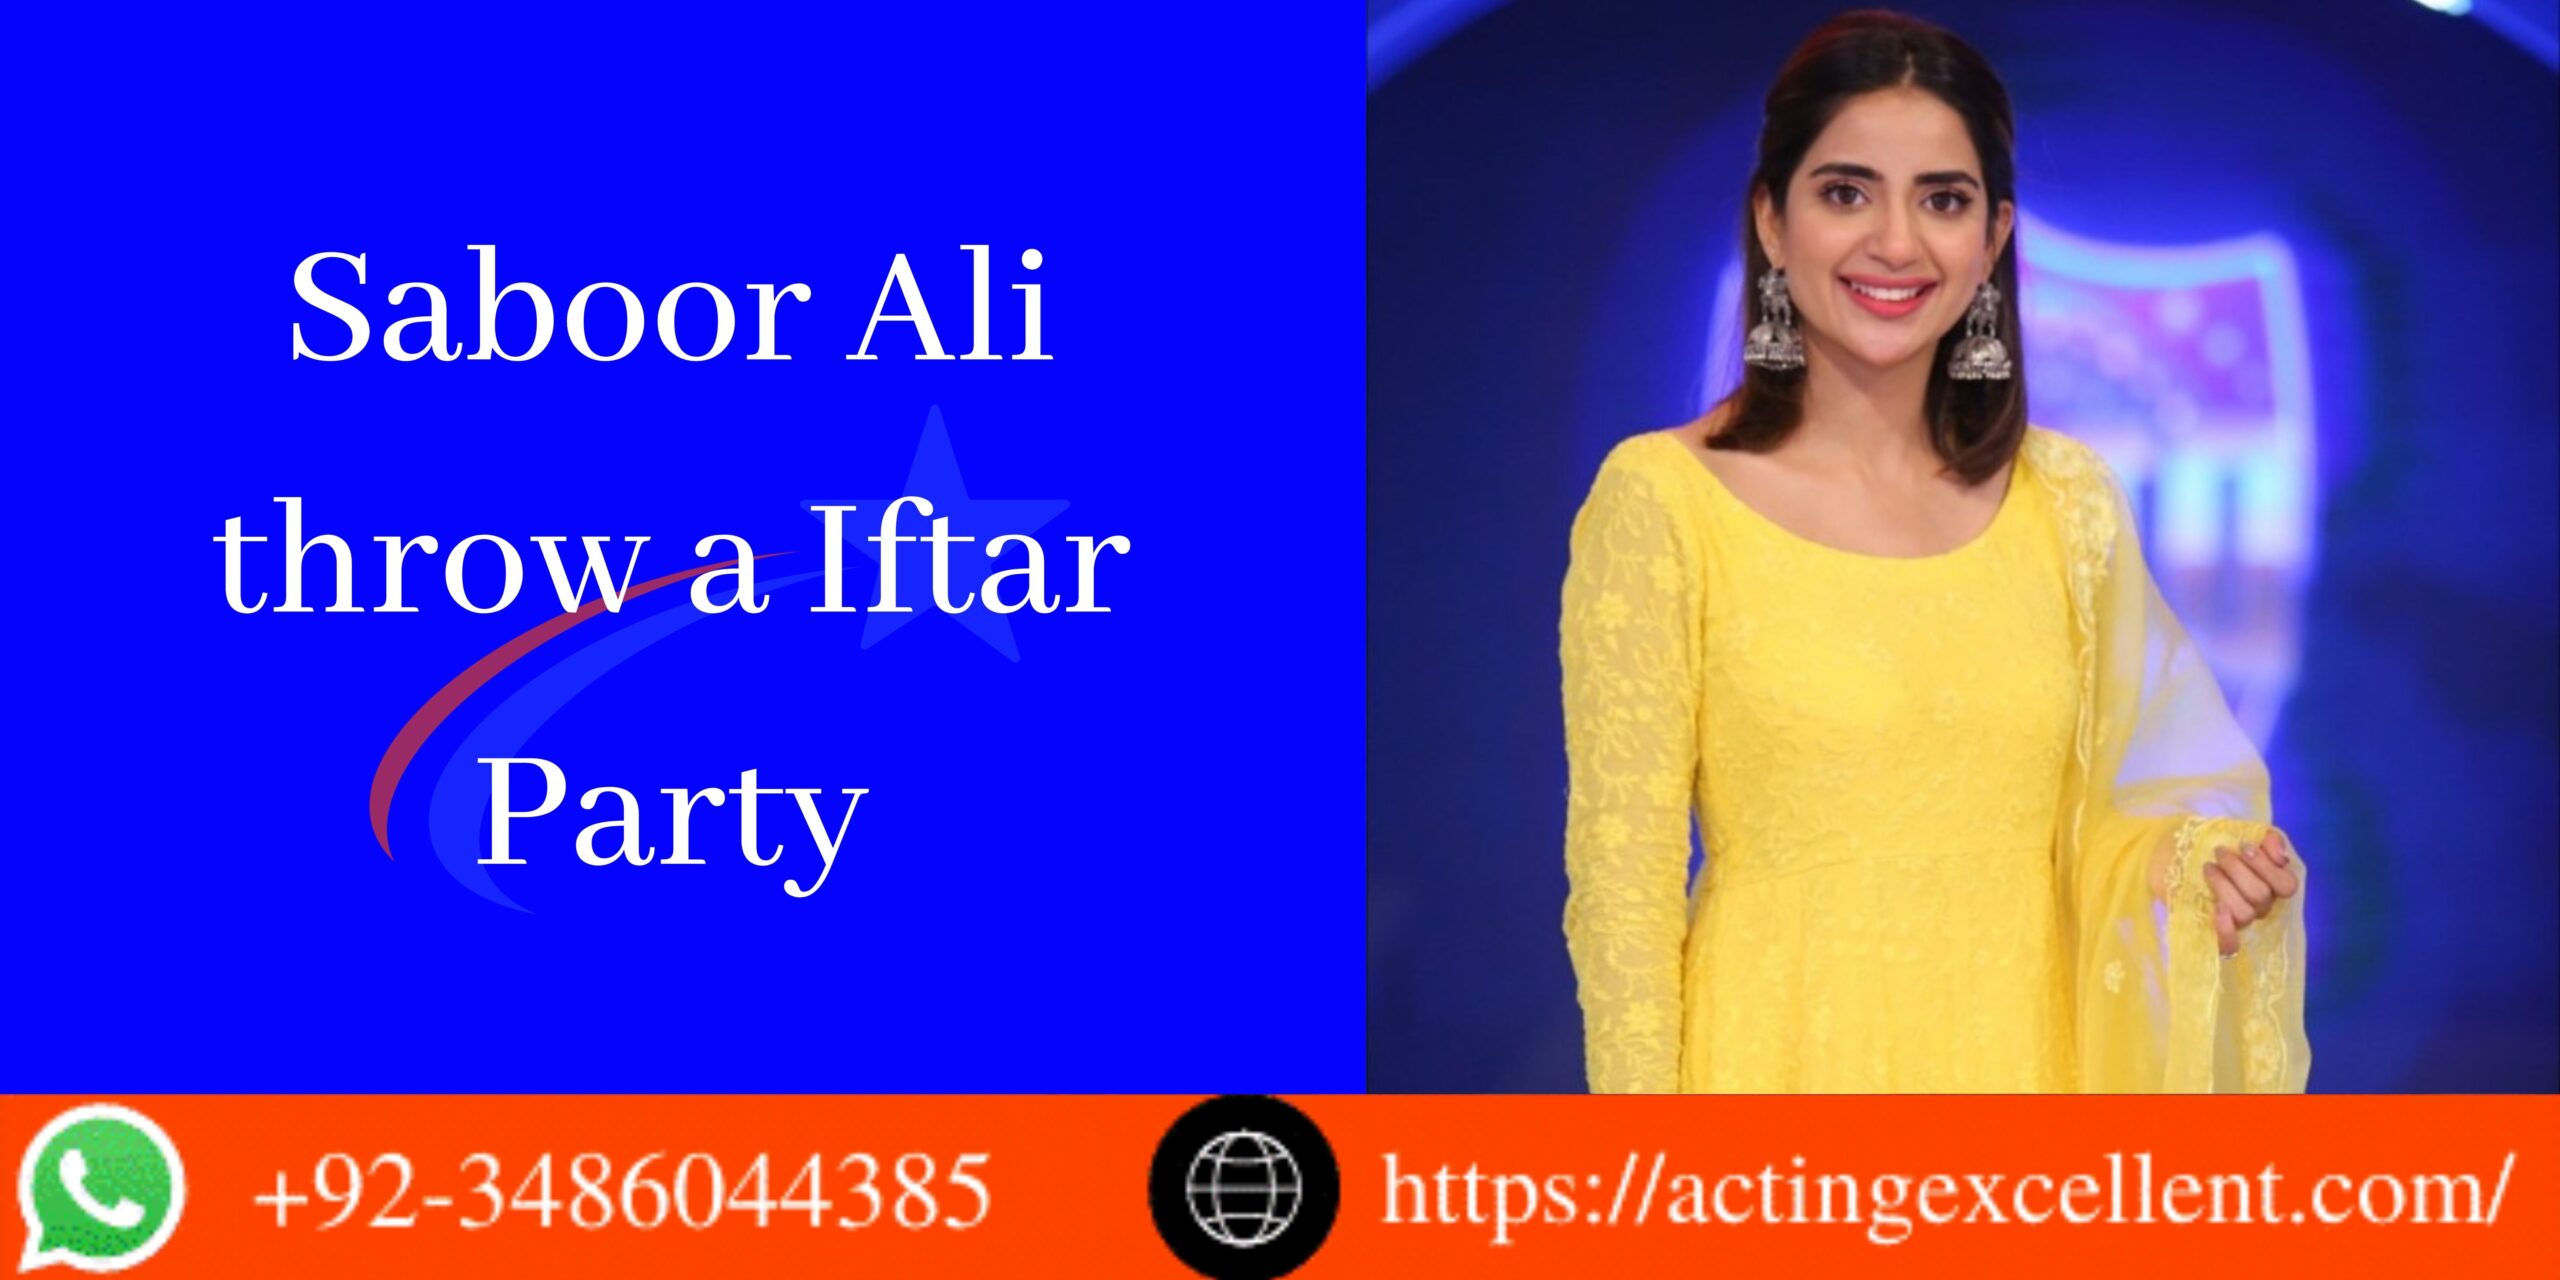 Saboor Ali throw a Iftar Party for Sajal Aly and Sadia Ghaffar after her marriage